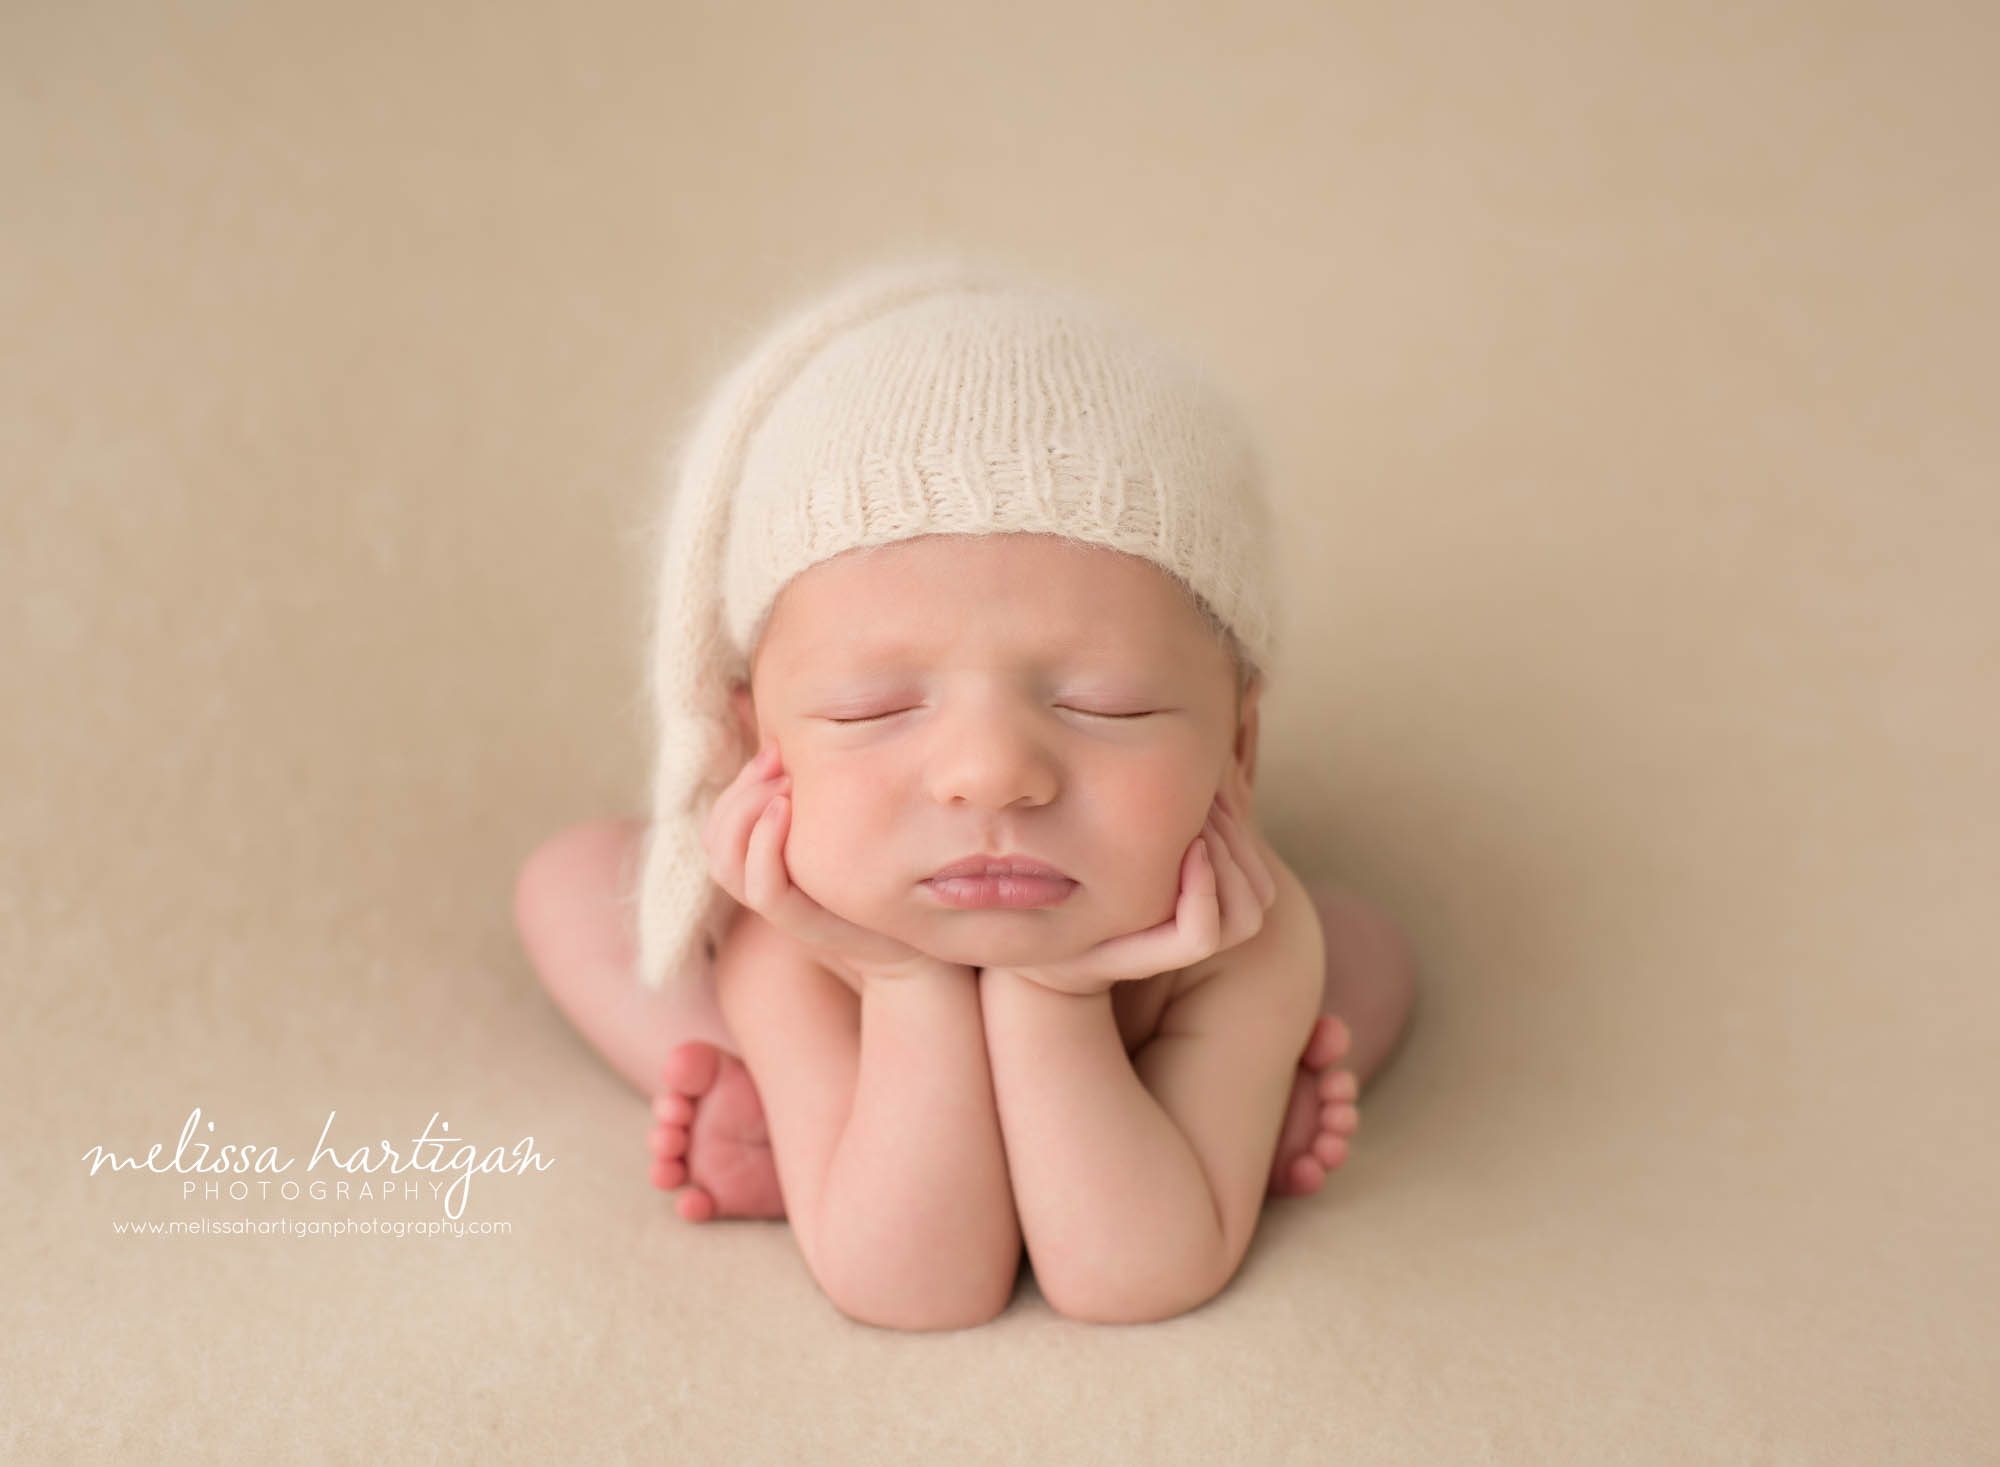 newborn baby boy posed froggy pose with knitted sleepy cap